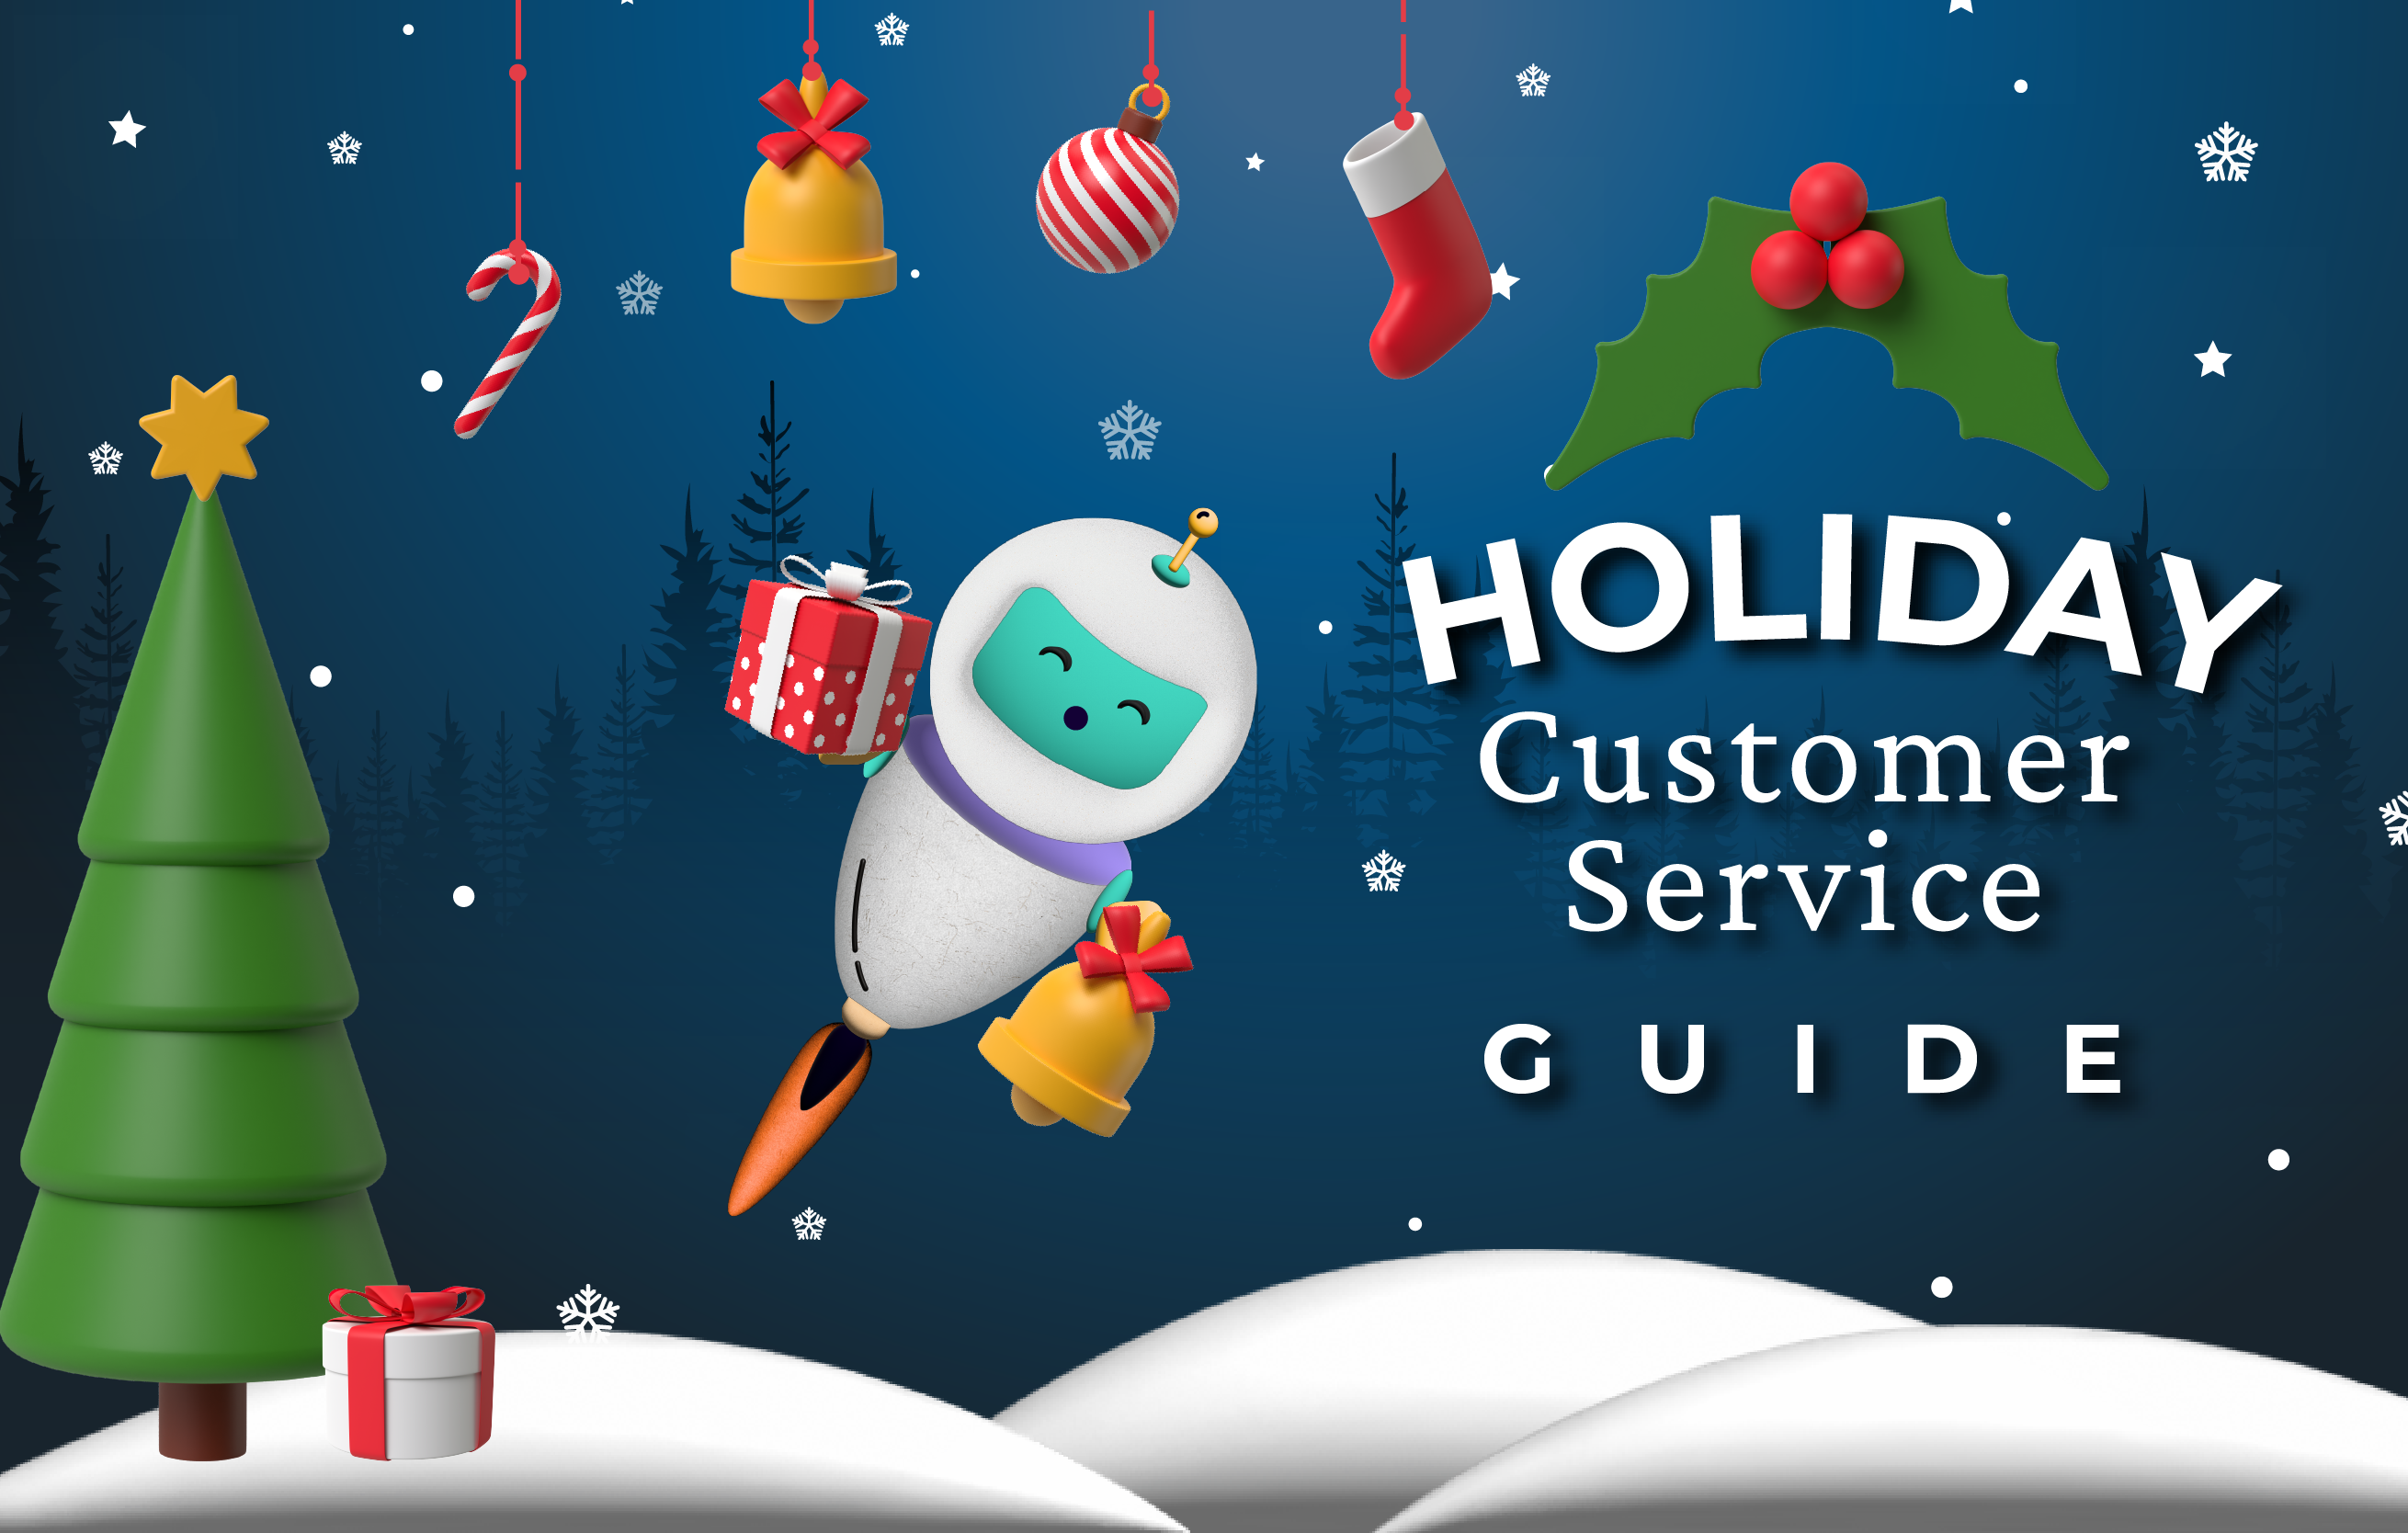 Guide to Holiday Customer Service